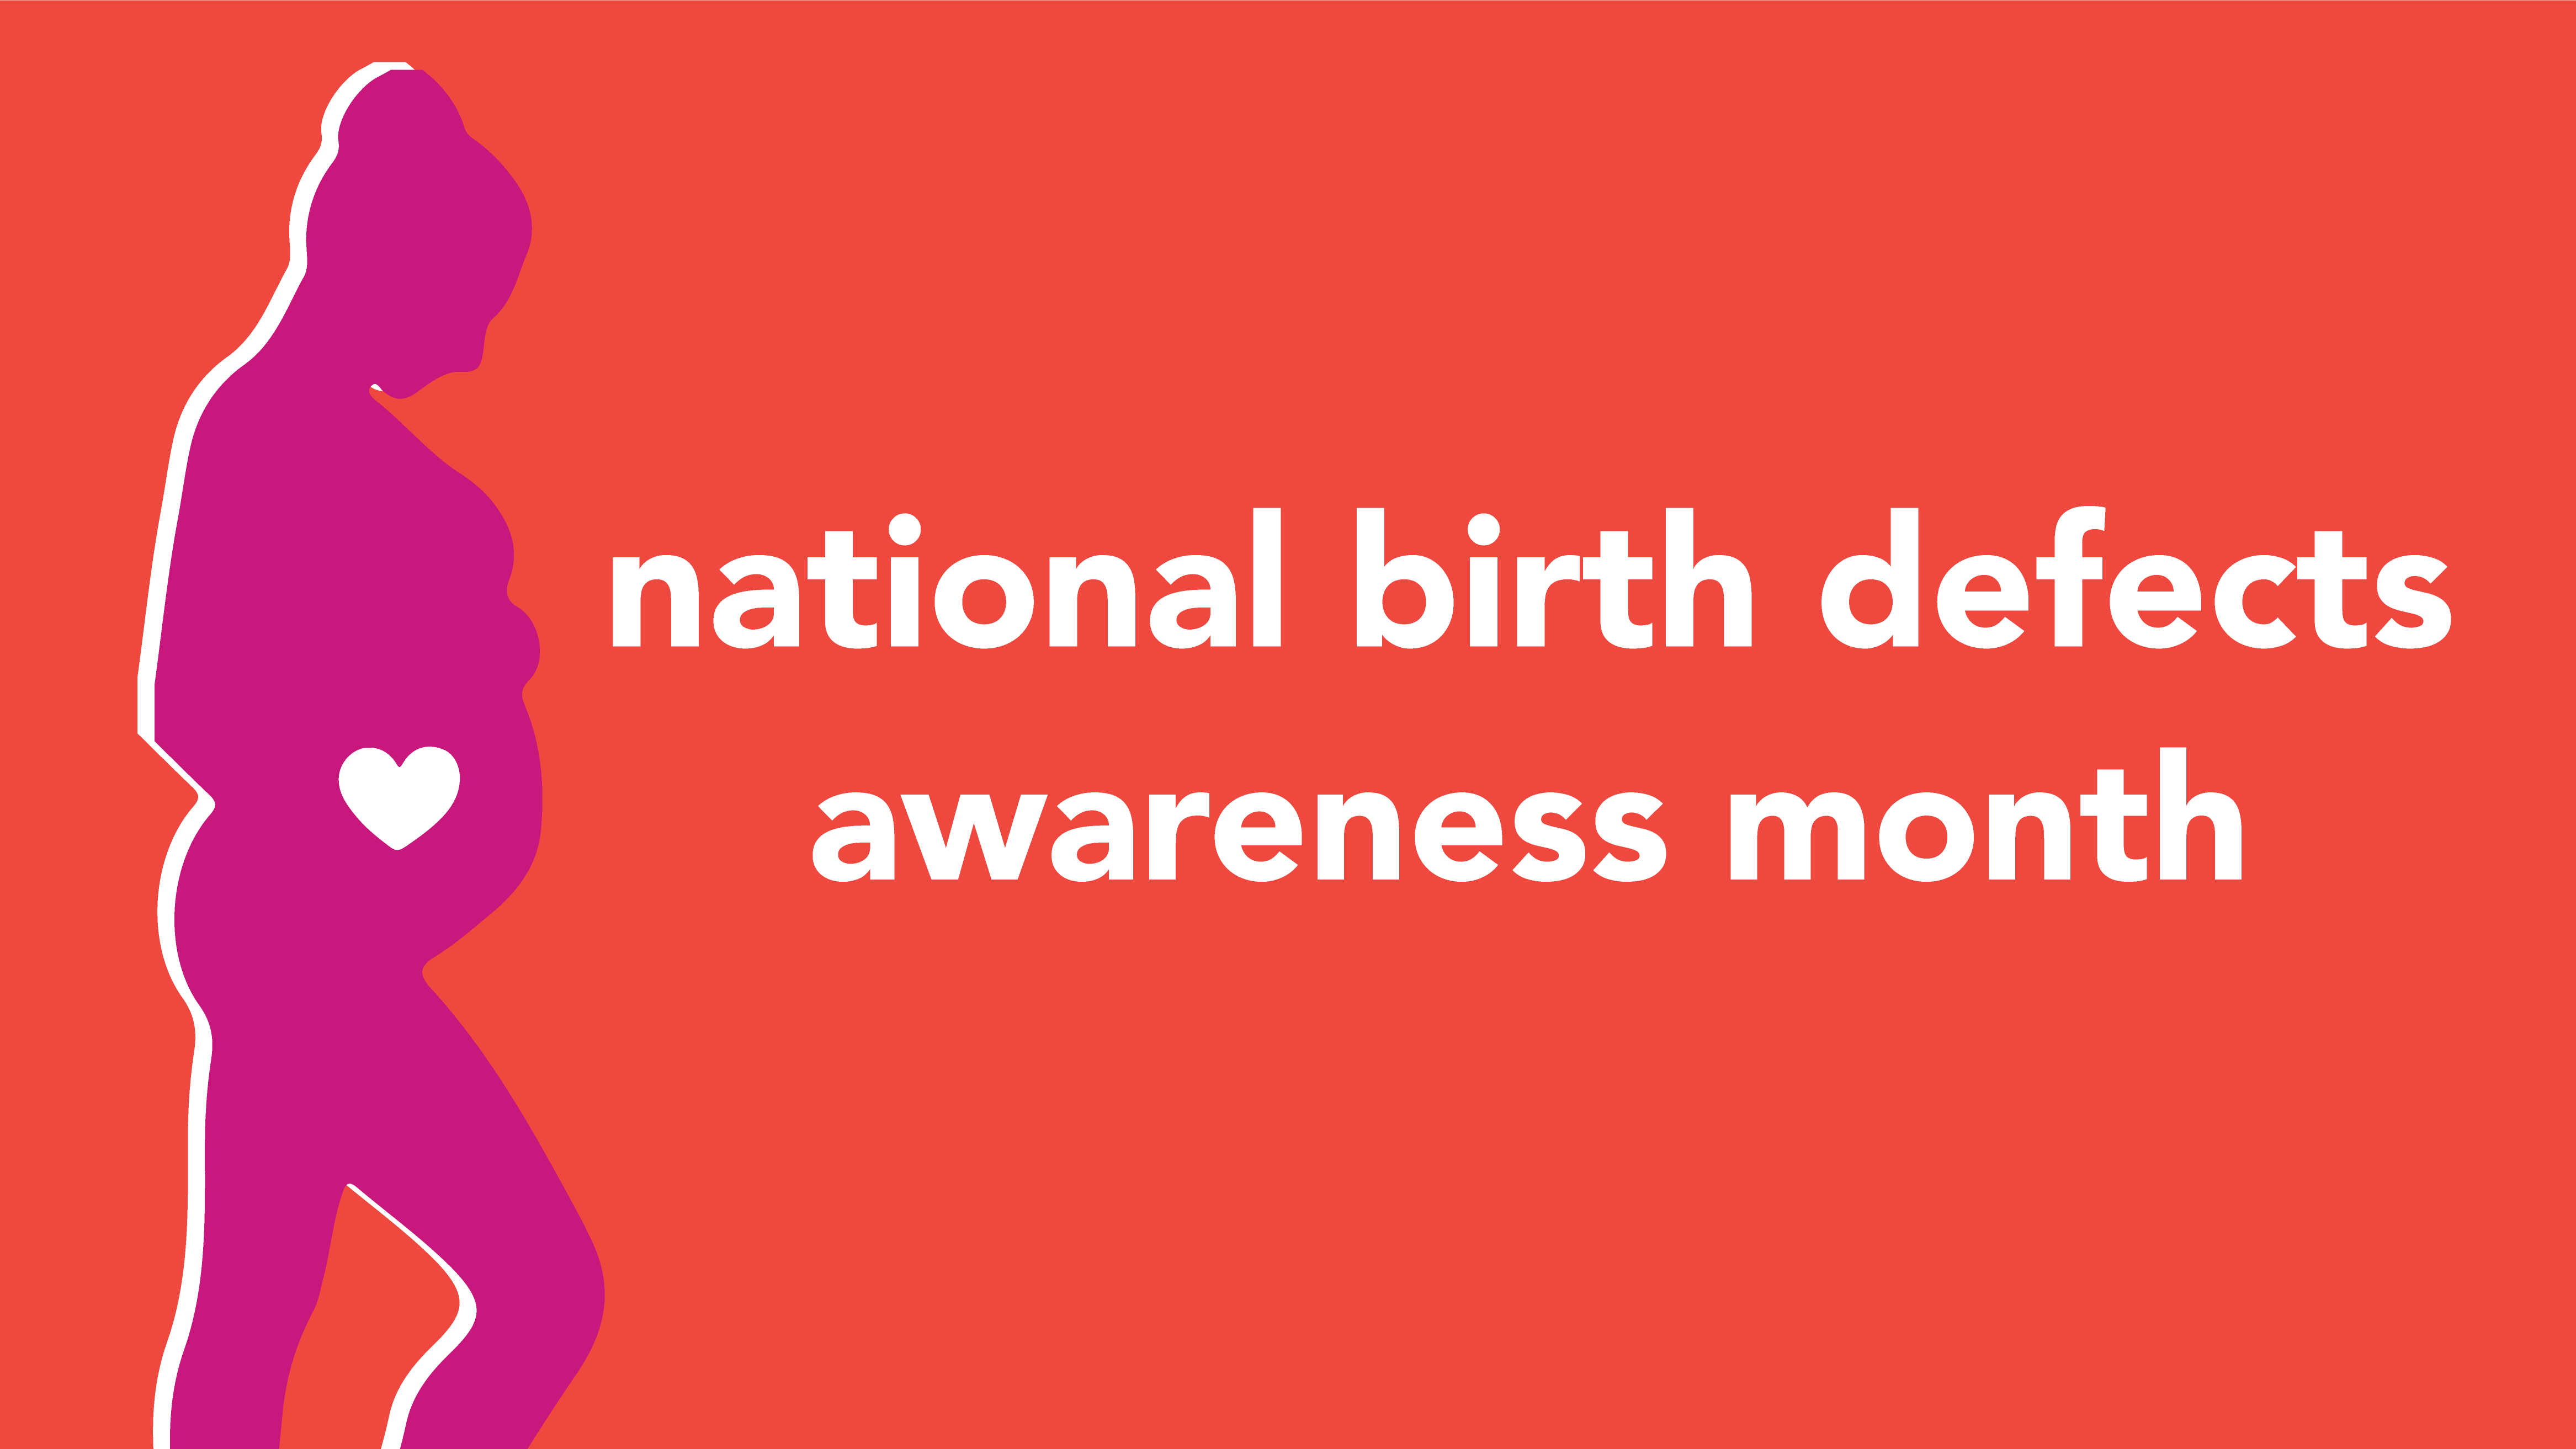 National Birth Defects Awareness Month